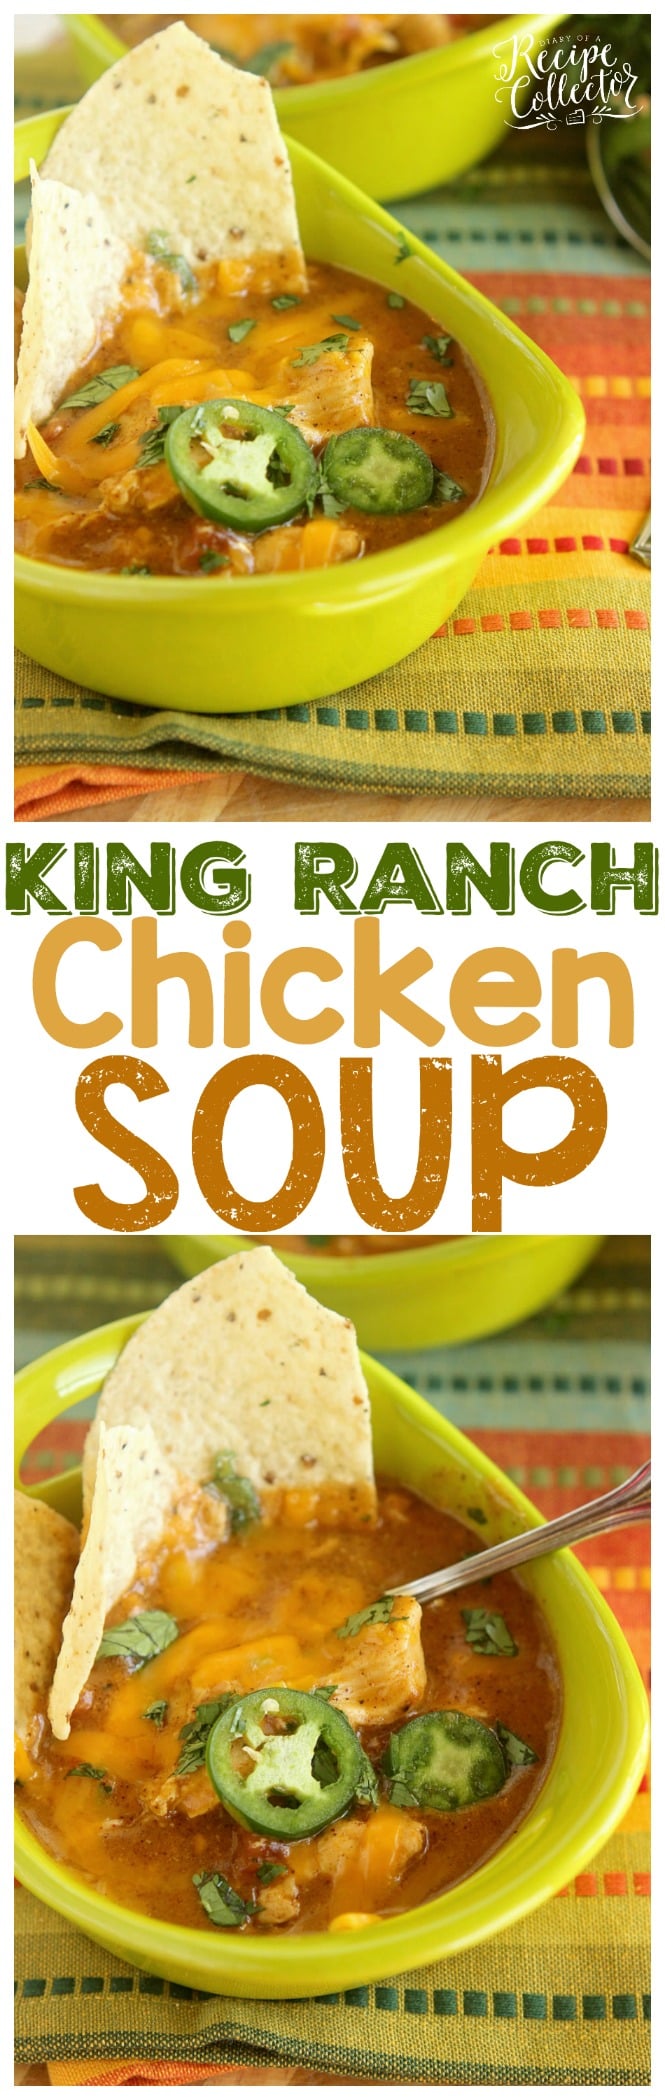 Slow Cooker King Ranch Chicken Soup - This delicious, creamy soup is filled with all those King Ranch Chicken Casserole flavors, and simmers away all day with the help of the crock pot! It's so easy and a huge hit!